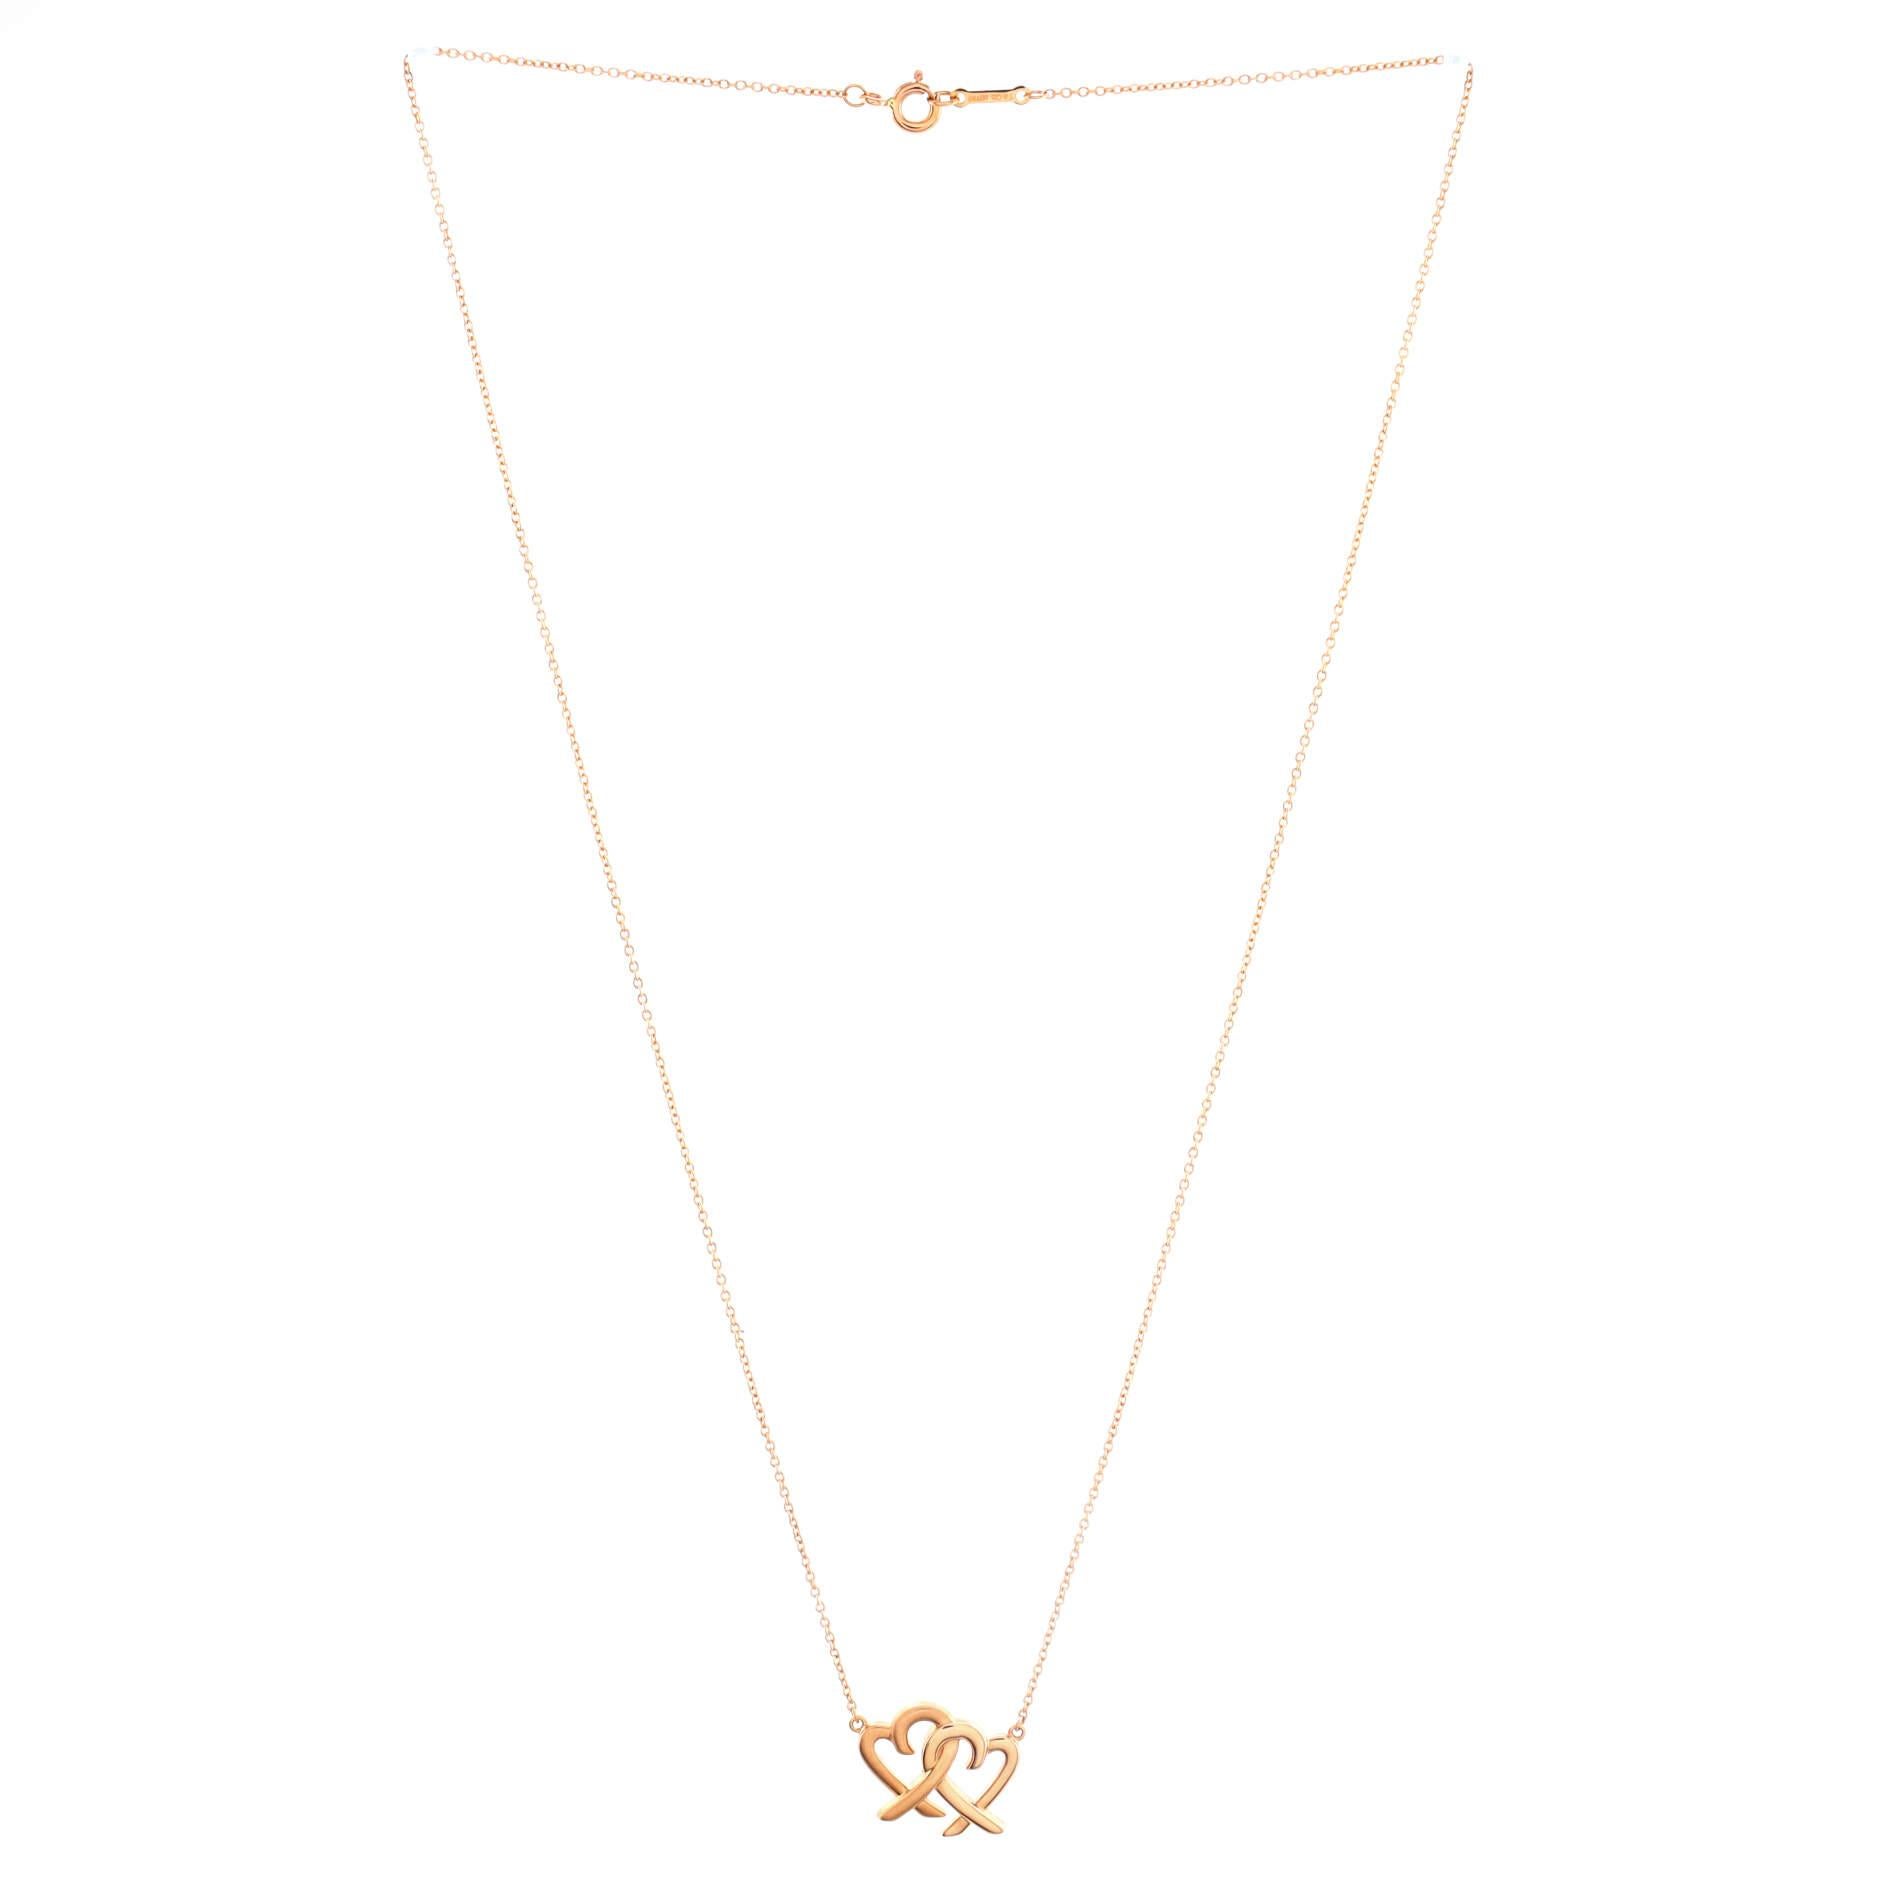 Condition: Great. Minor wear throughout.
Accessories: No Accessories
Measurements: Length: 18.00 mm, Pendant Length: 13.40 mm, Pendant Width: 17.75 mm
Designer: Tiffany & Co.
Model: Paloma Picasso Loving Heart Interlocking Pendant Necklace 18K Rose